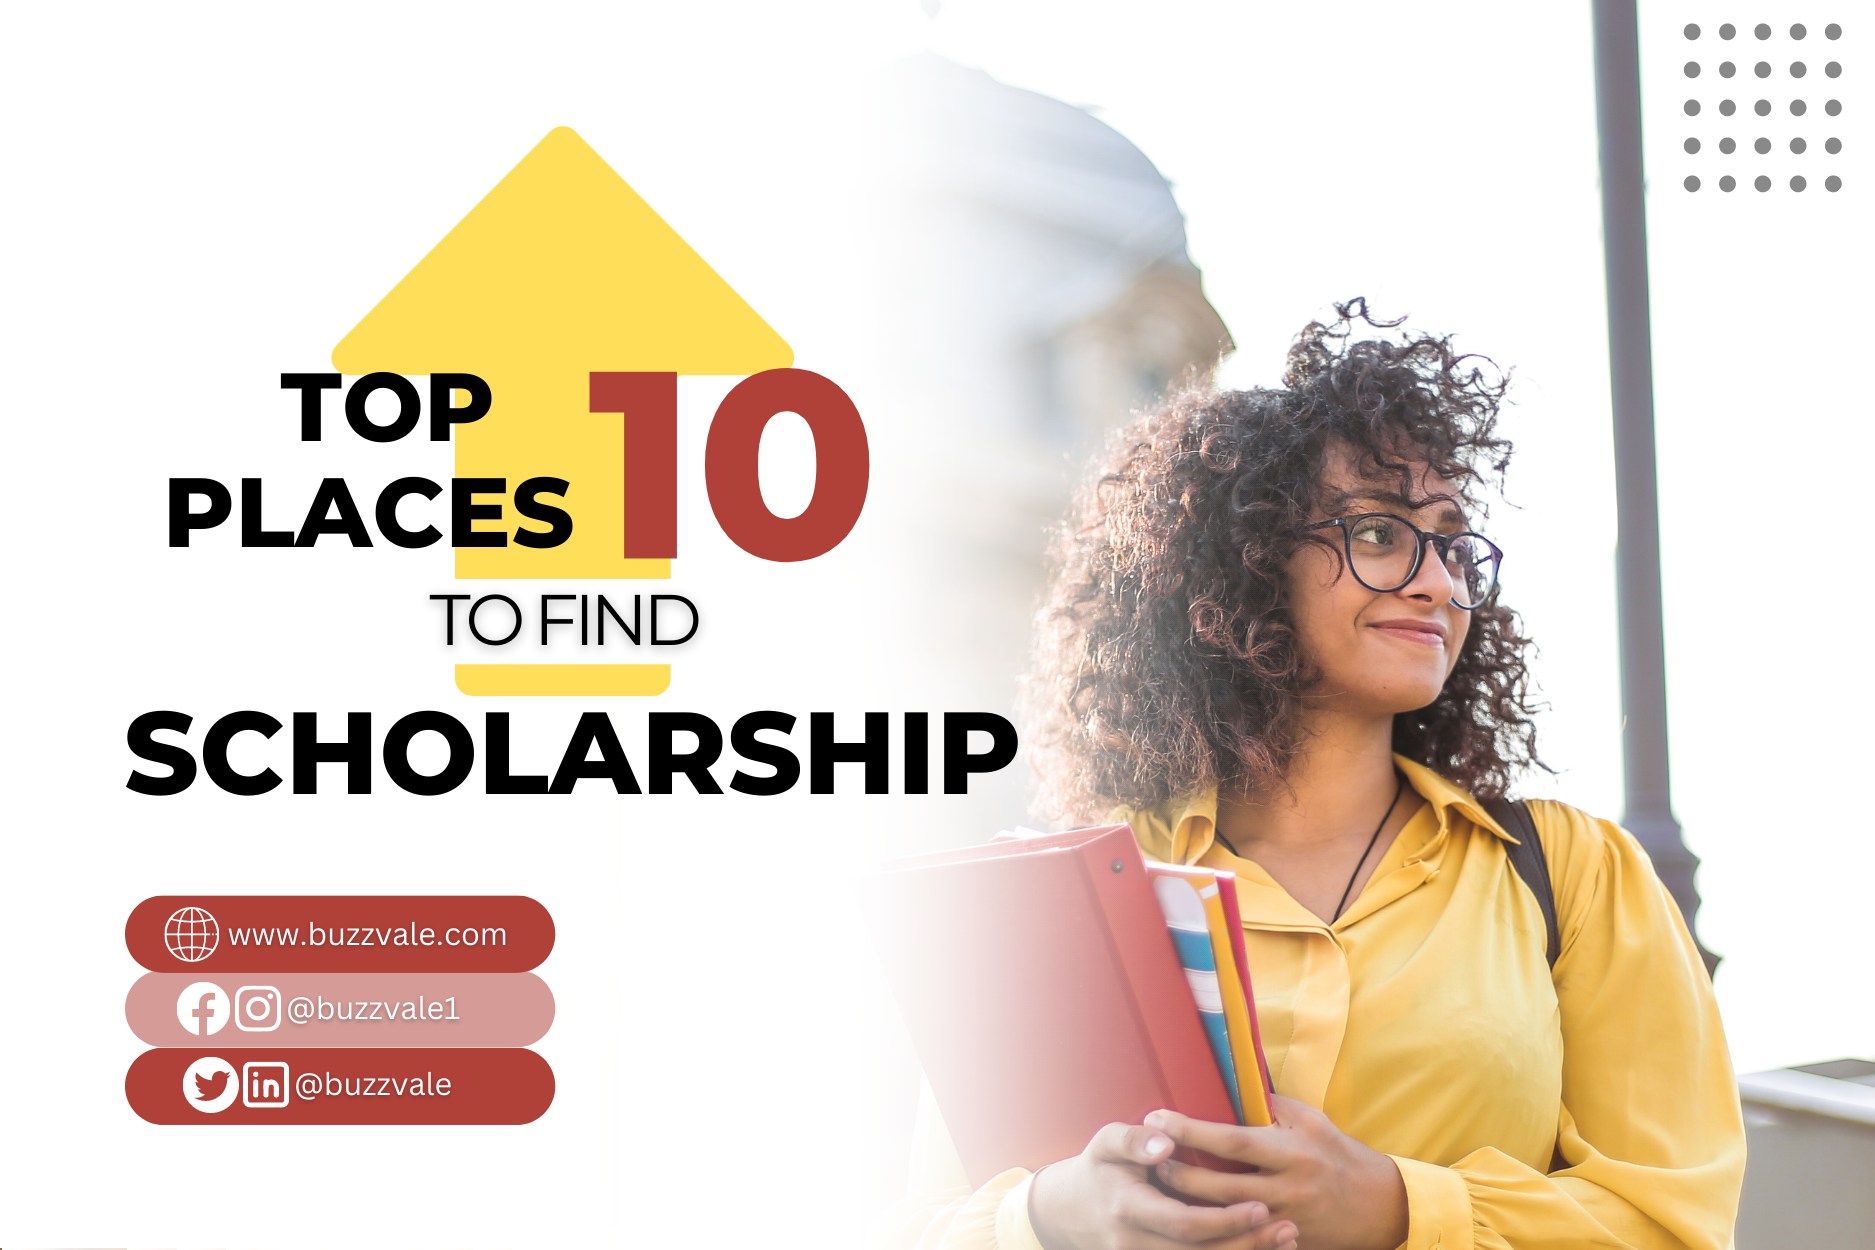 Top 5 places to find scholarships